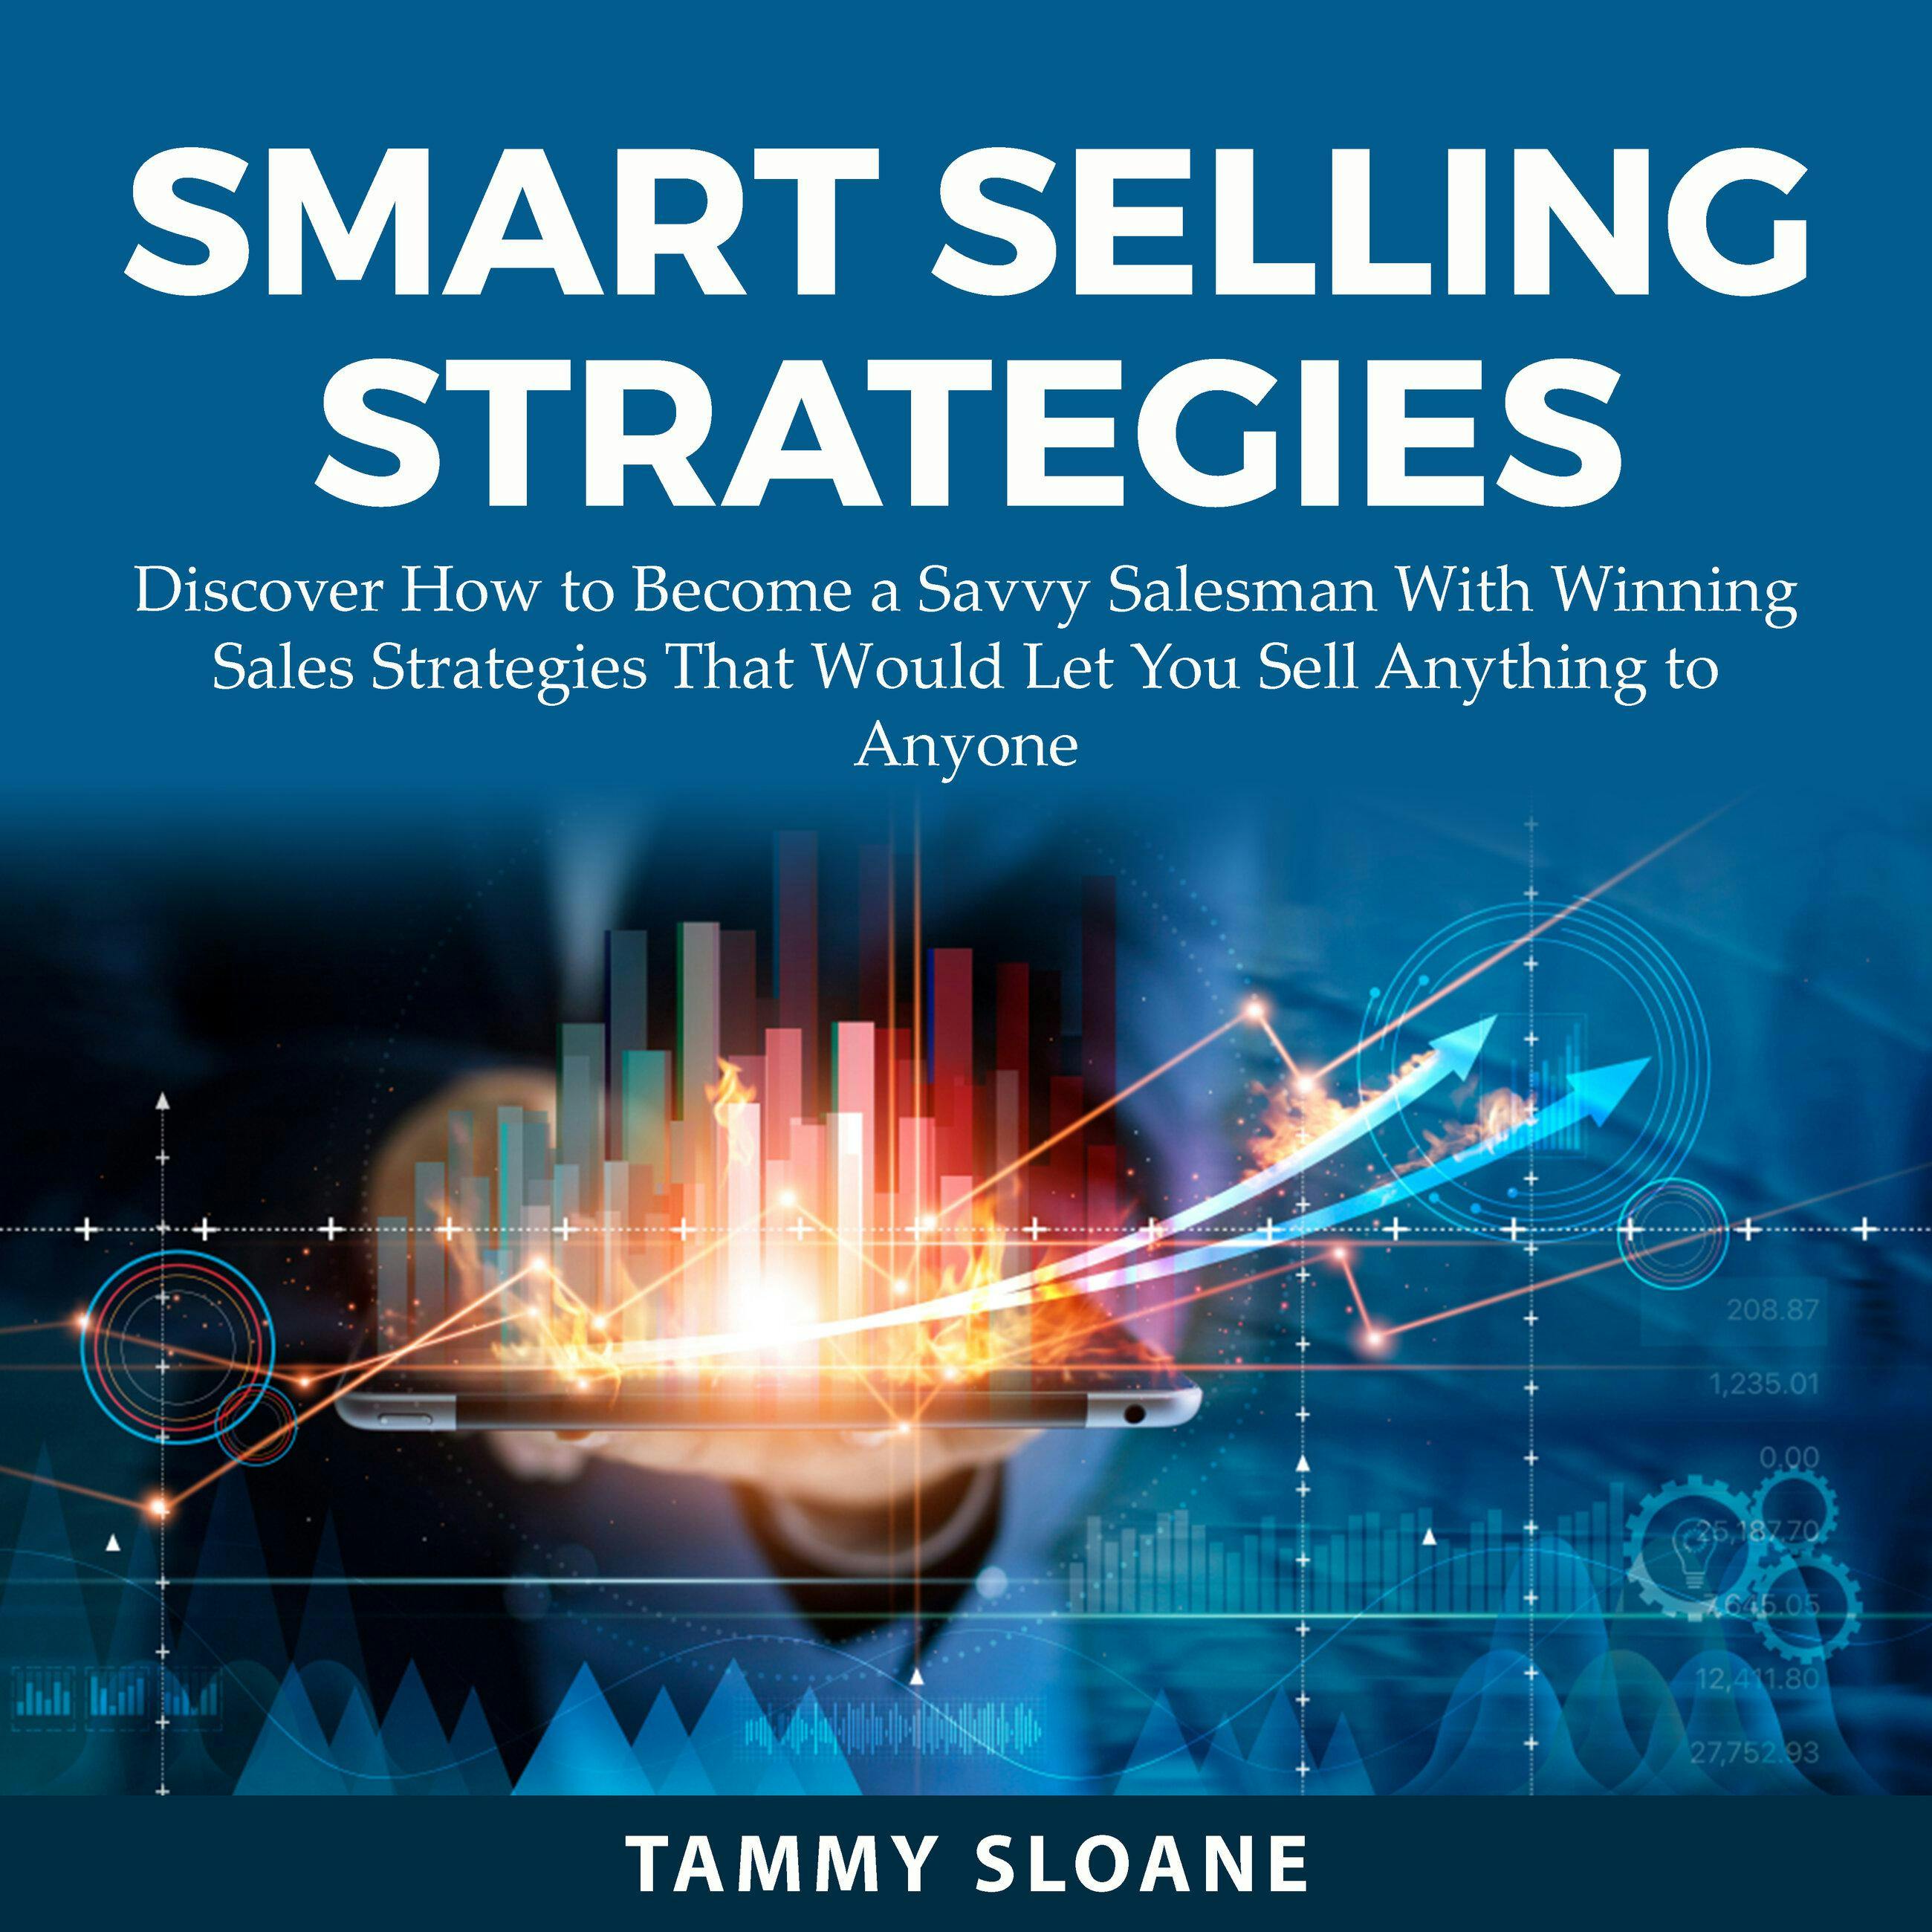 Smart Selling Strategies: Discover How to Become a Savvy Salesman That With Winning Sales Strategies That Would Let You Sell Anything to Anyone - undefined